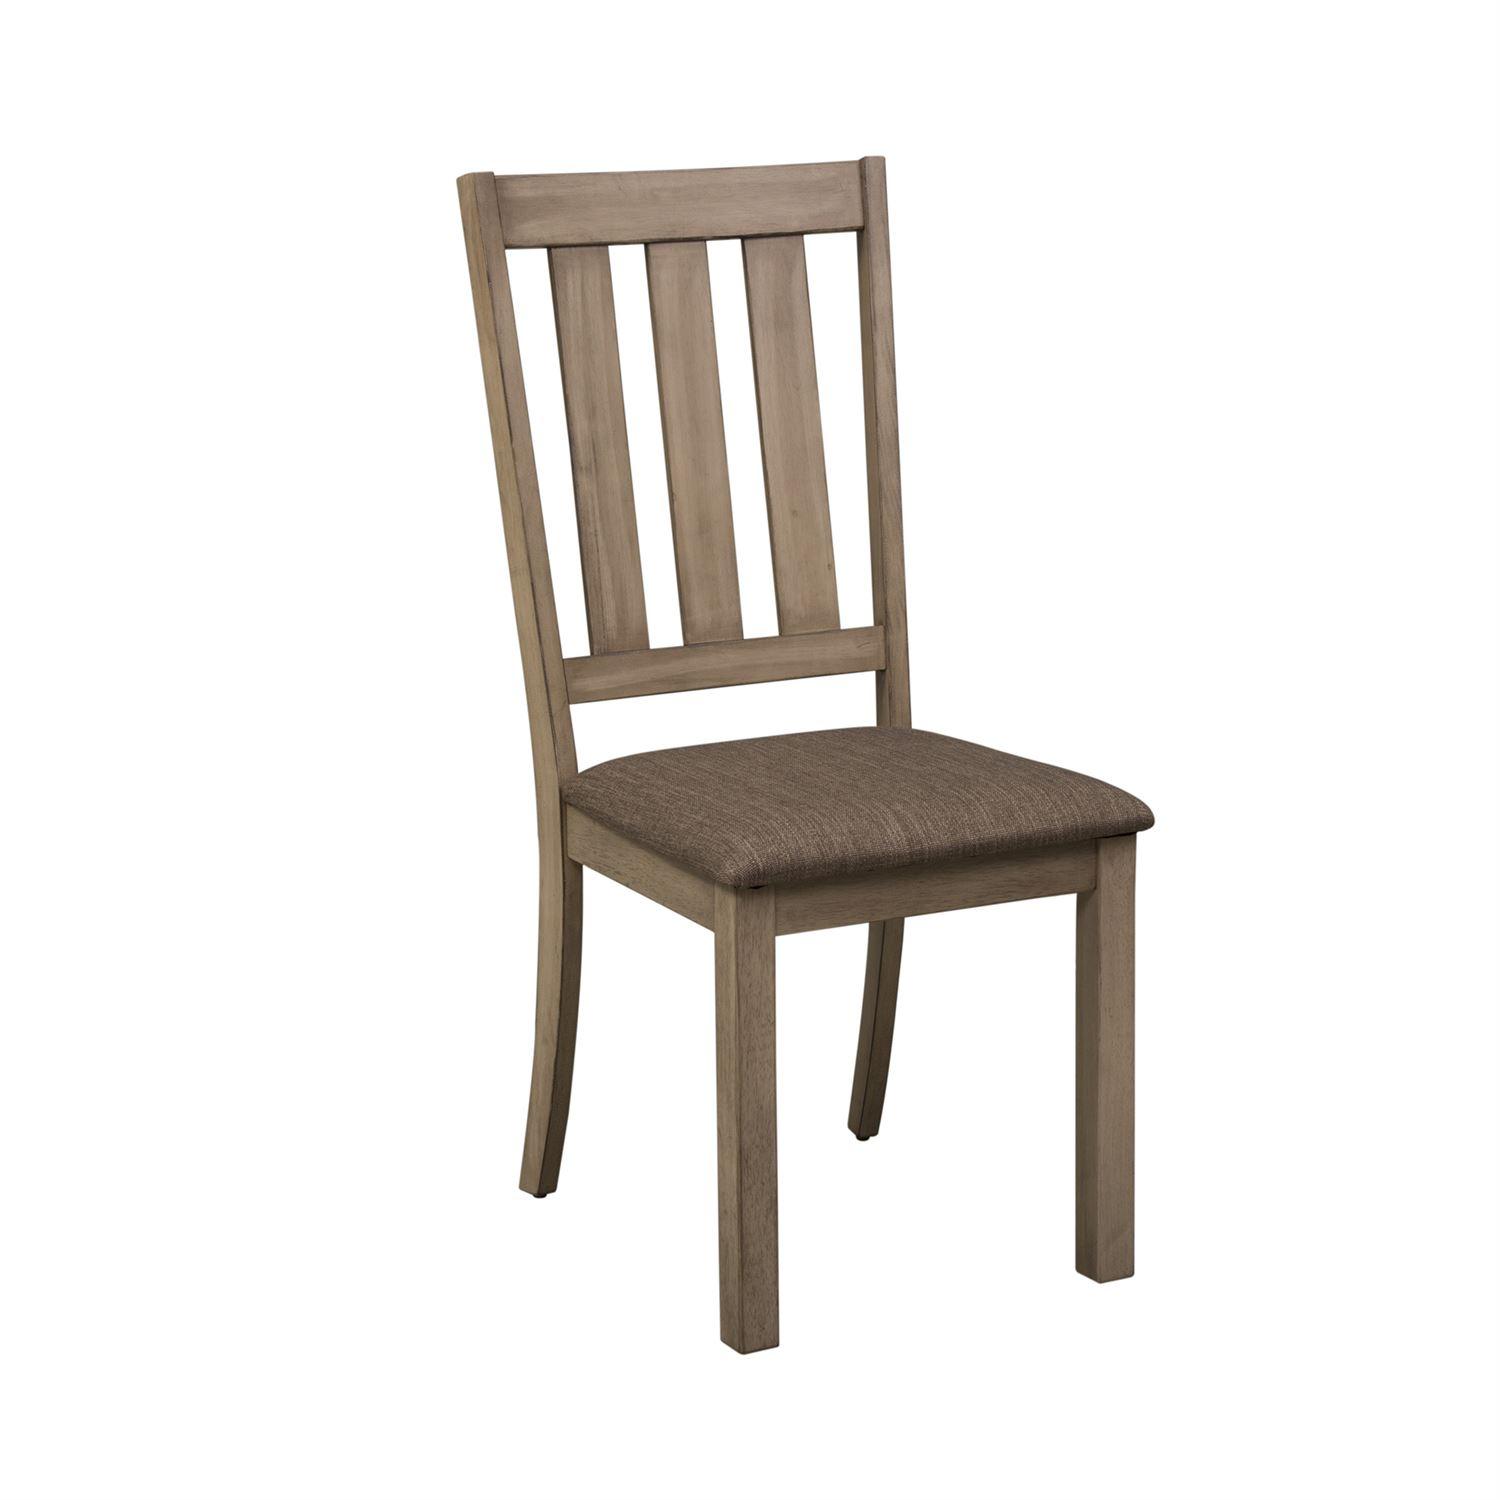 

    
Transitional Beige Slat Dining Chair Set 2 Sun Valley (439-DR) Liberty Furniture
